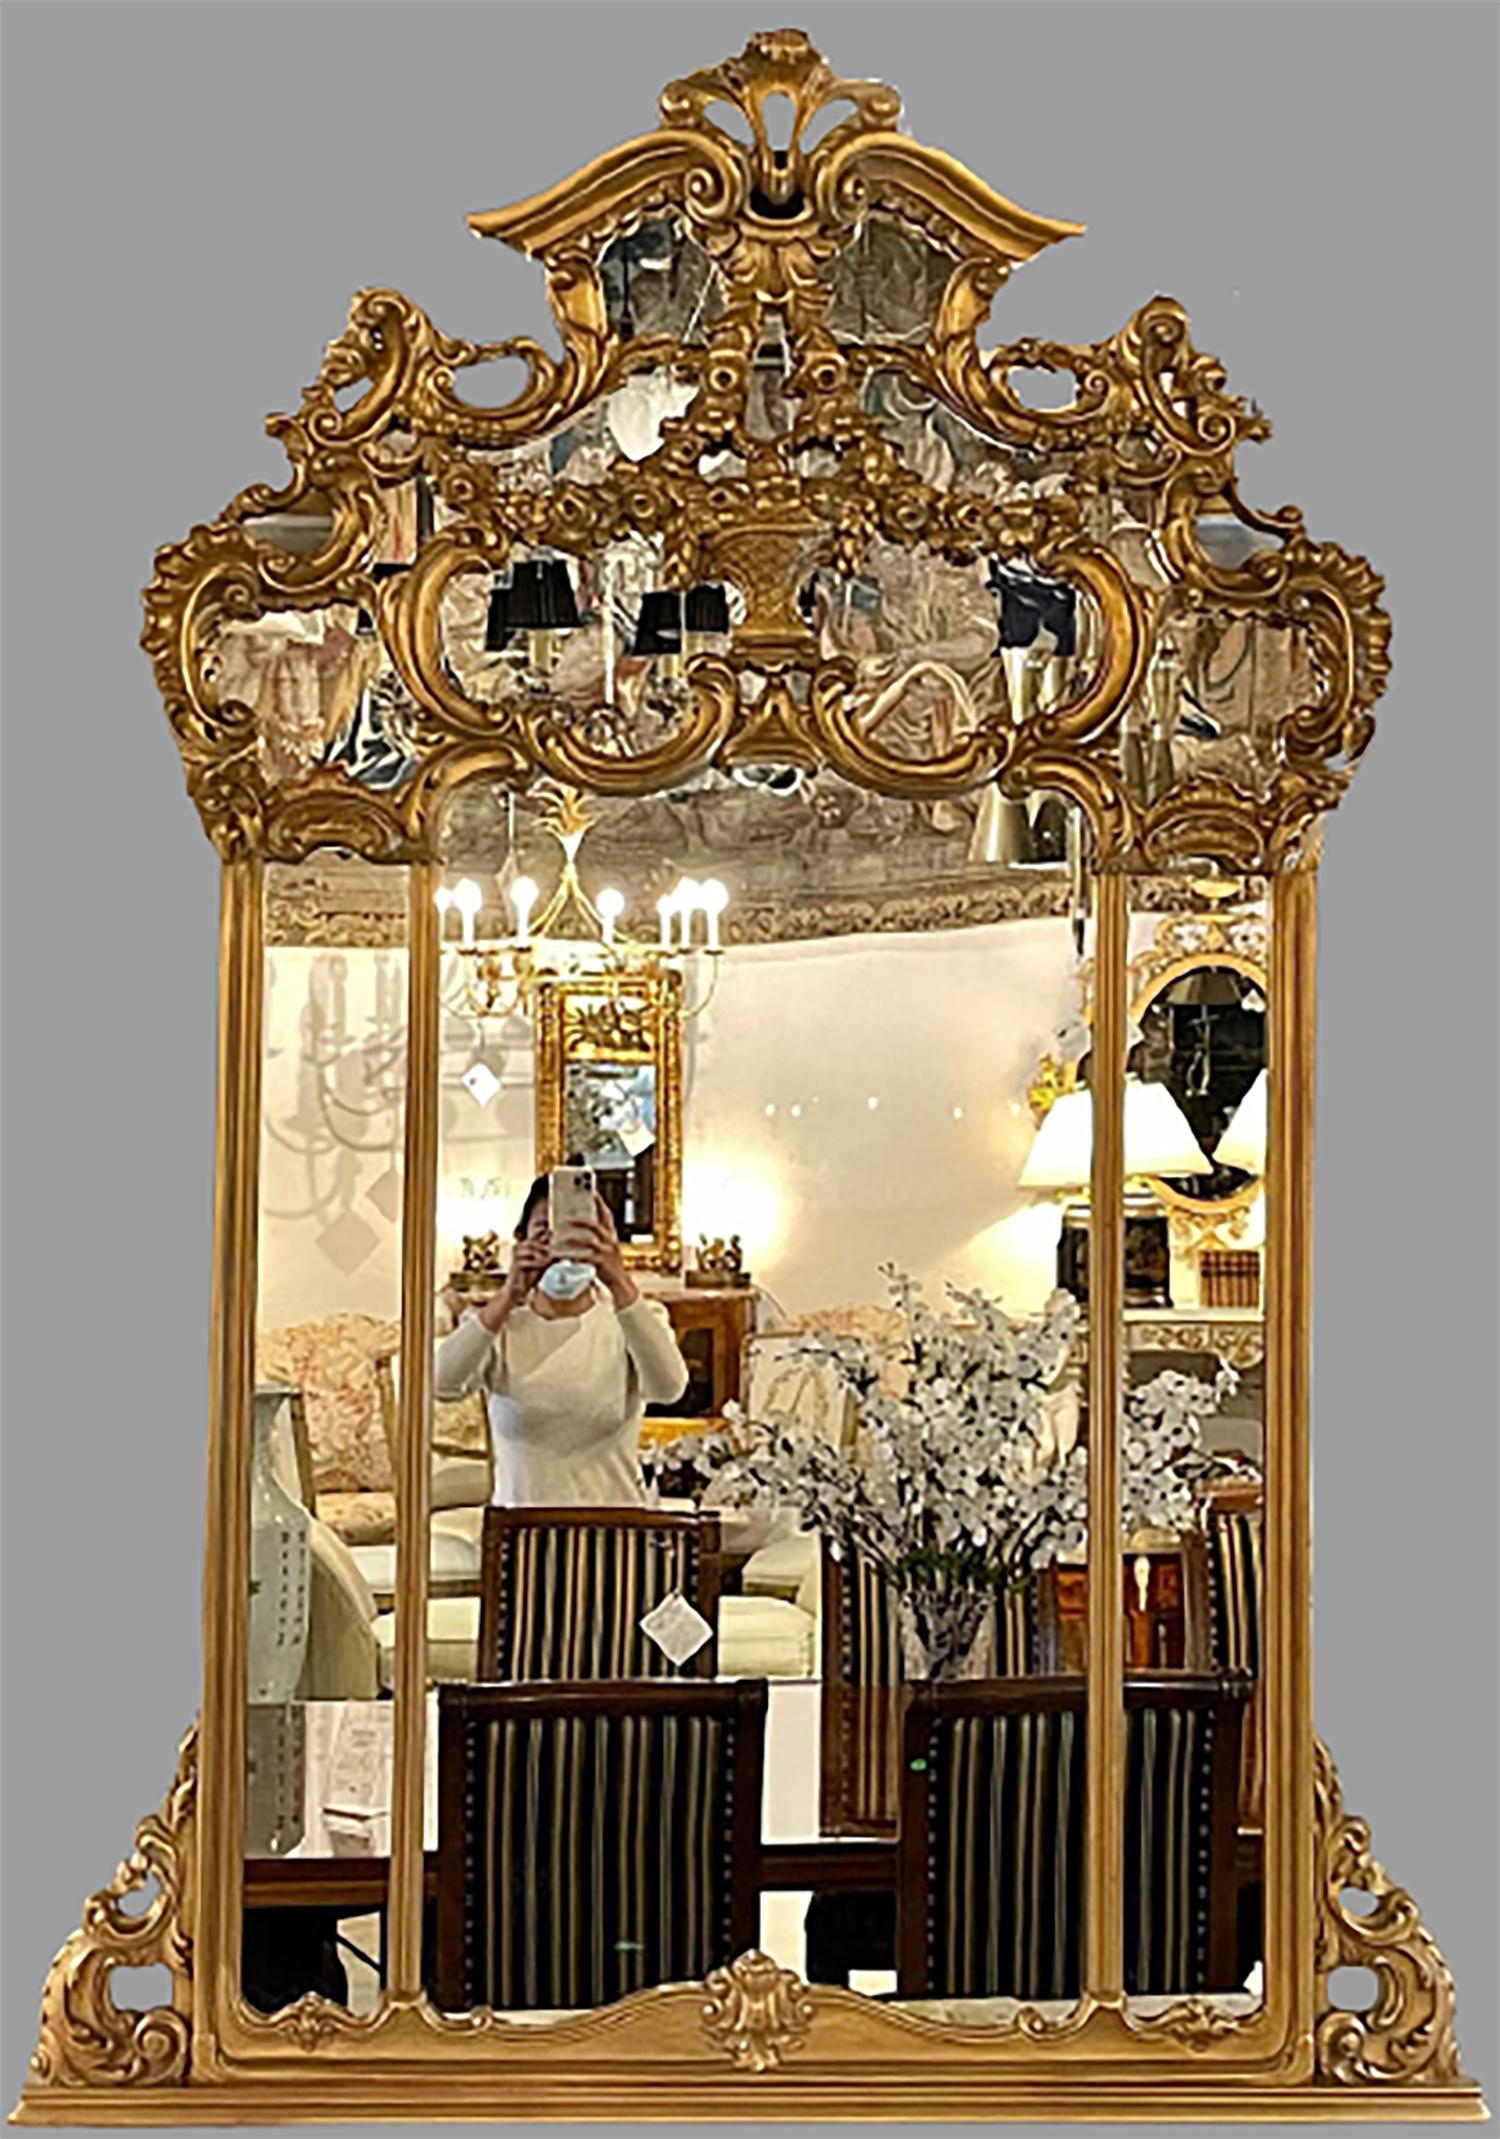 Giltwood over the mantel mirror. This wall or console mirror is simply stunning and certain to add a fine reflection to any home setting. The clear center mirror flanked in a carved gilt frame of Louis XVI fashion and design having a central theme